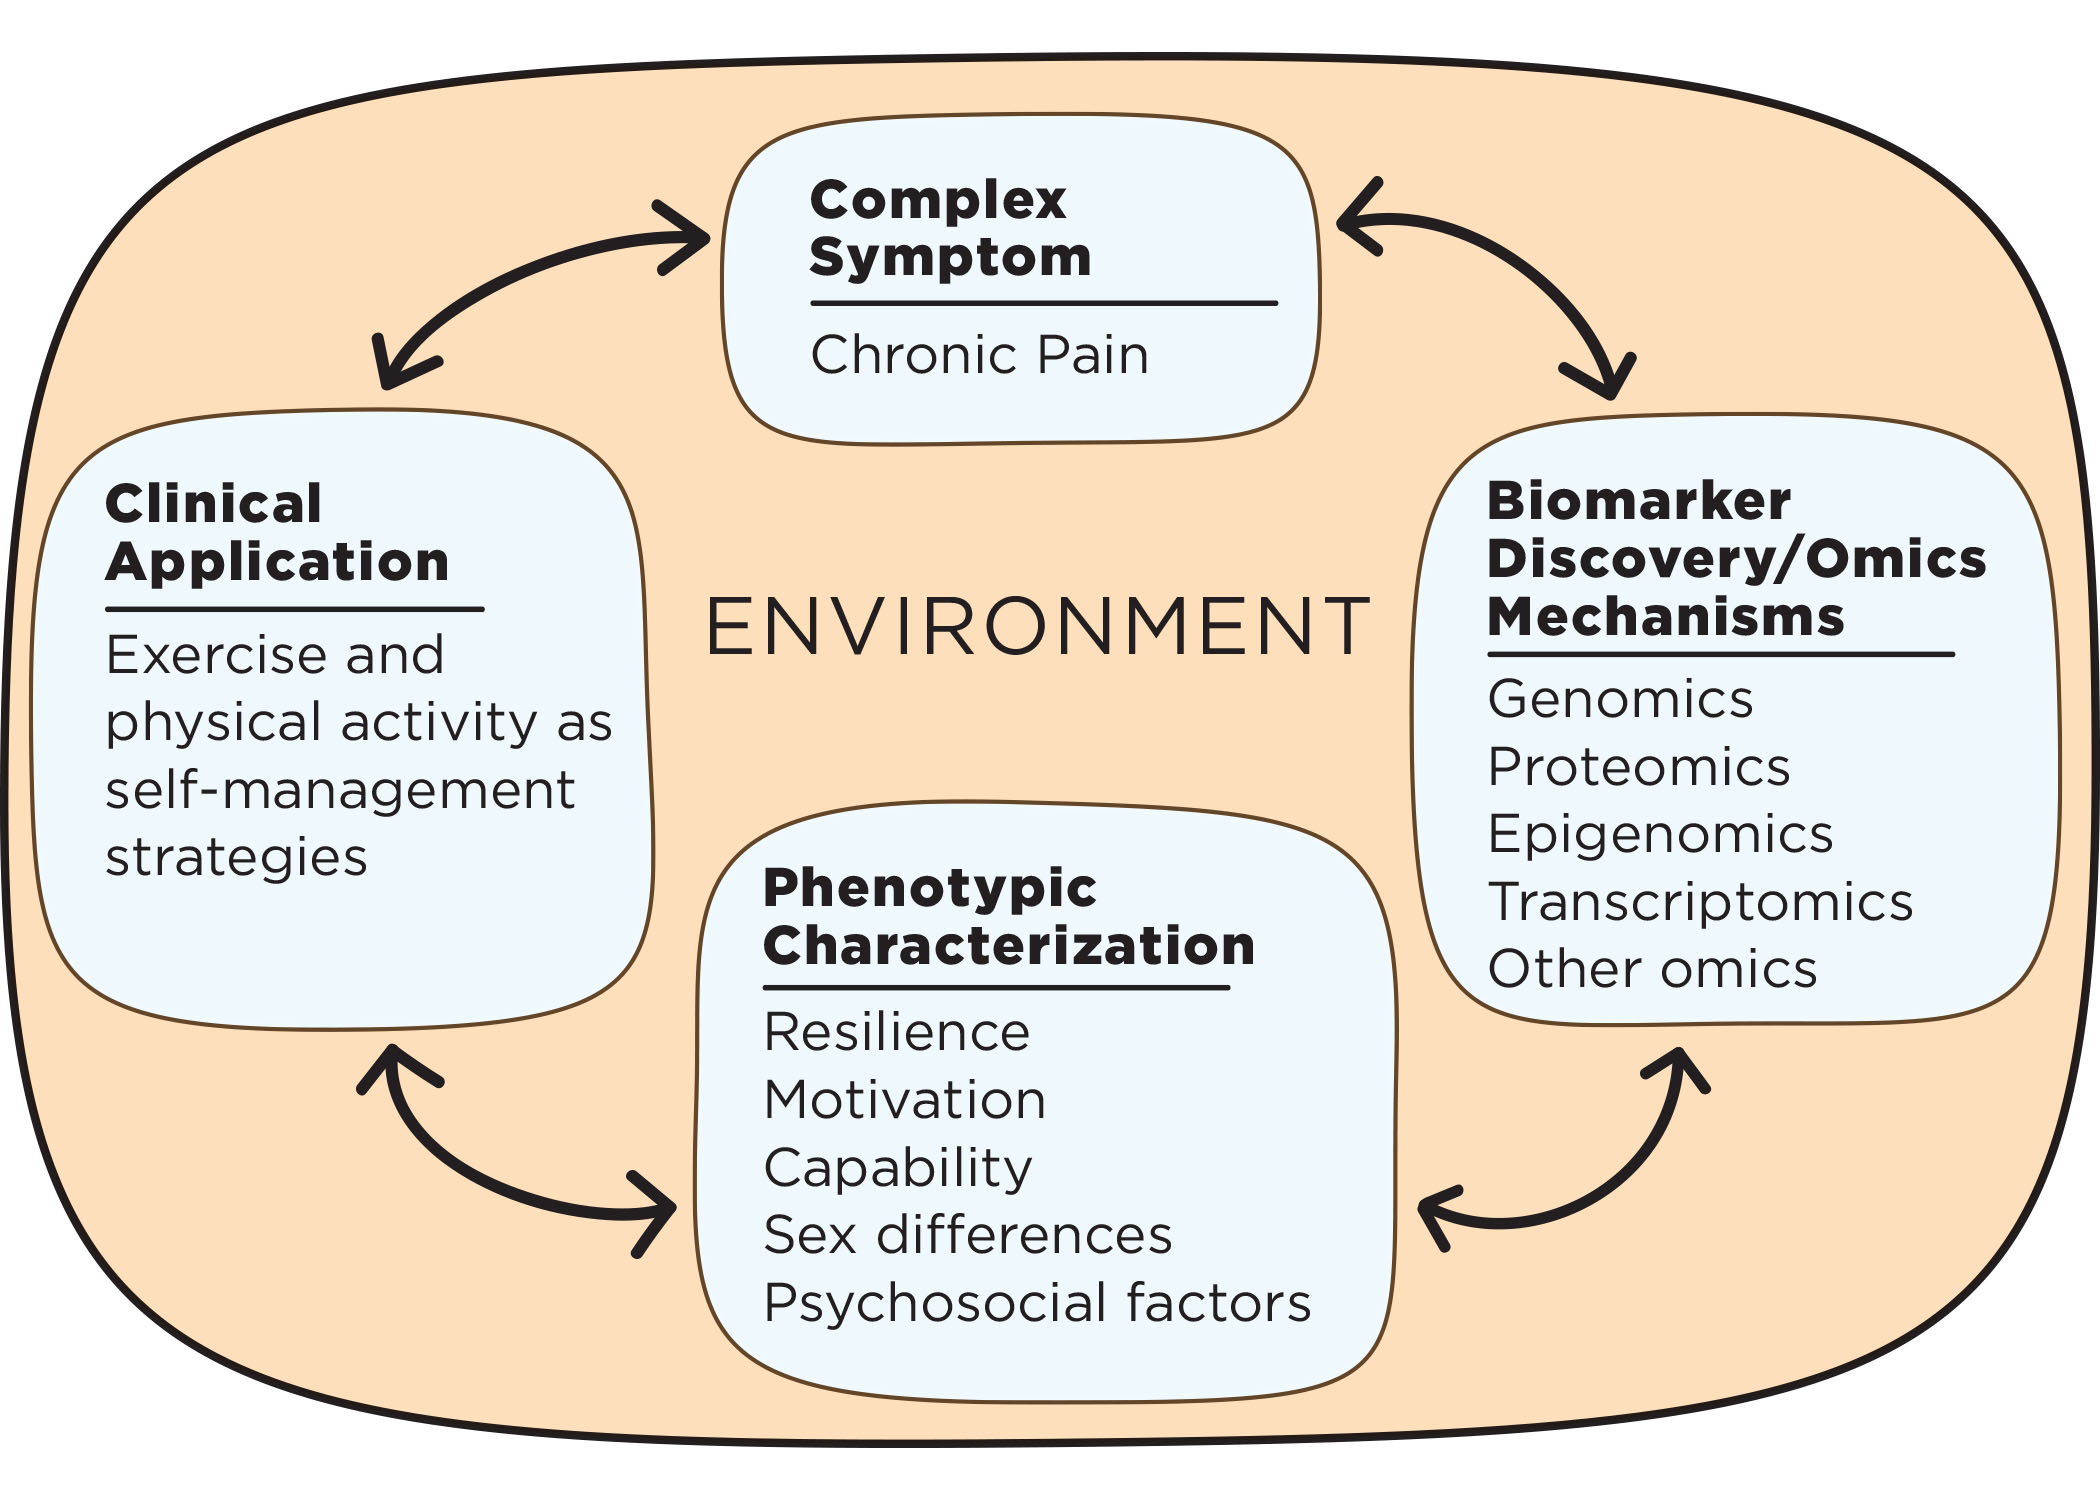 Chart with complex symptom (chronic pain), biomarker discovery/omics mechanisms (genomics, proteomics, epigenomics, transcriptomics, other omics), phenotypic characterization (resilience, motivation, capability, sex differences, psychosocial factors), and clinical application (exercise and physical activity as self-management strategies) in a loop